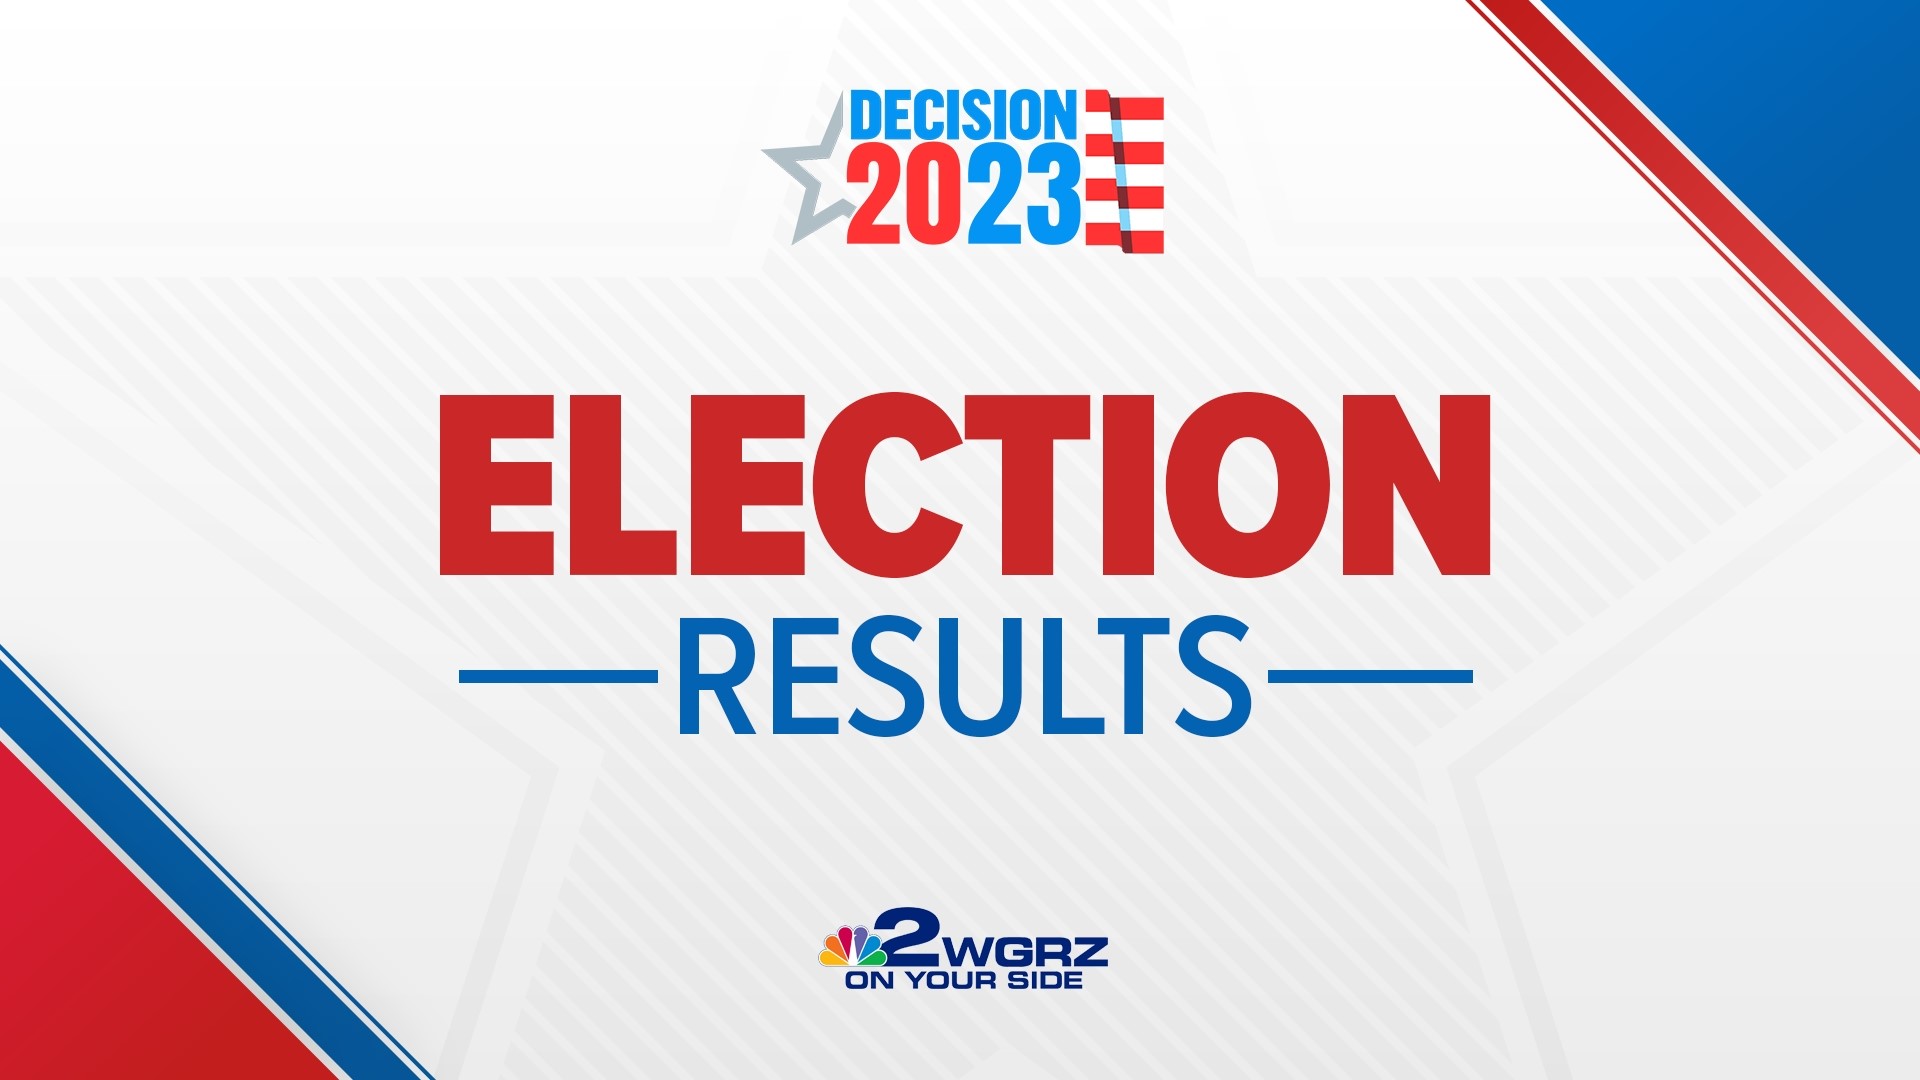 2 On Your Side's Scott Levin has a wrap up on 2023 election results.